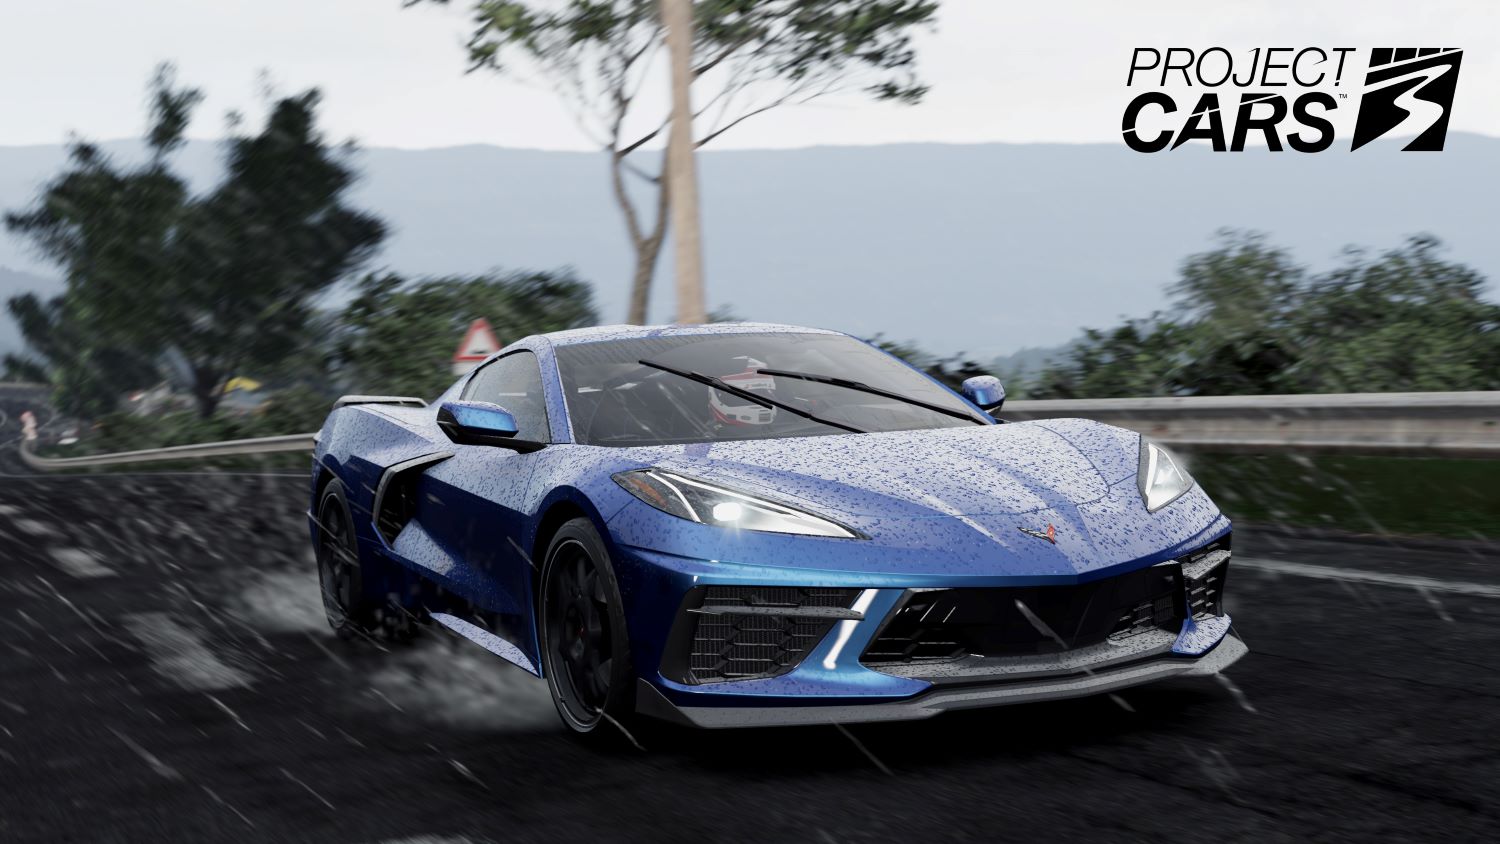 Project cars - Launch Trailer 